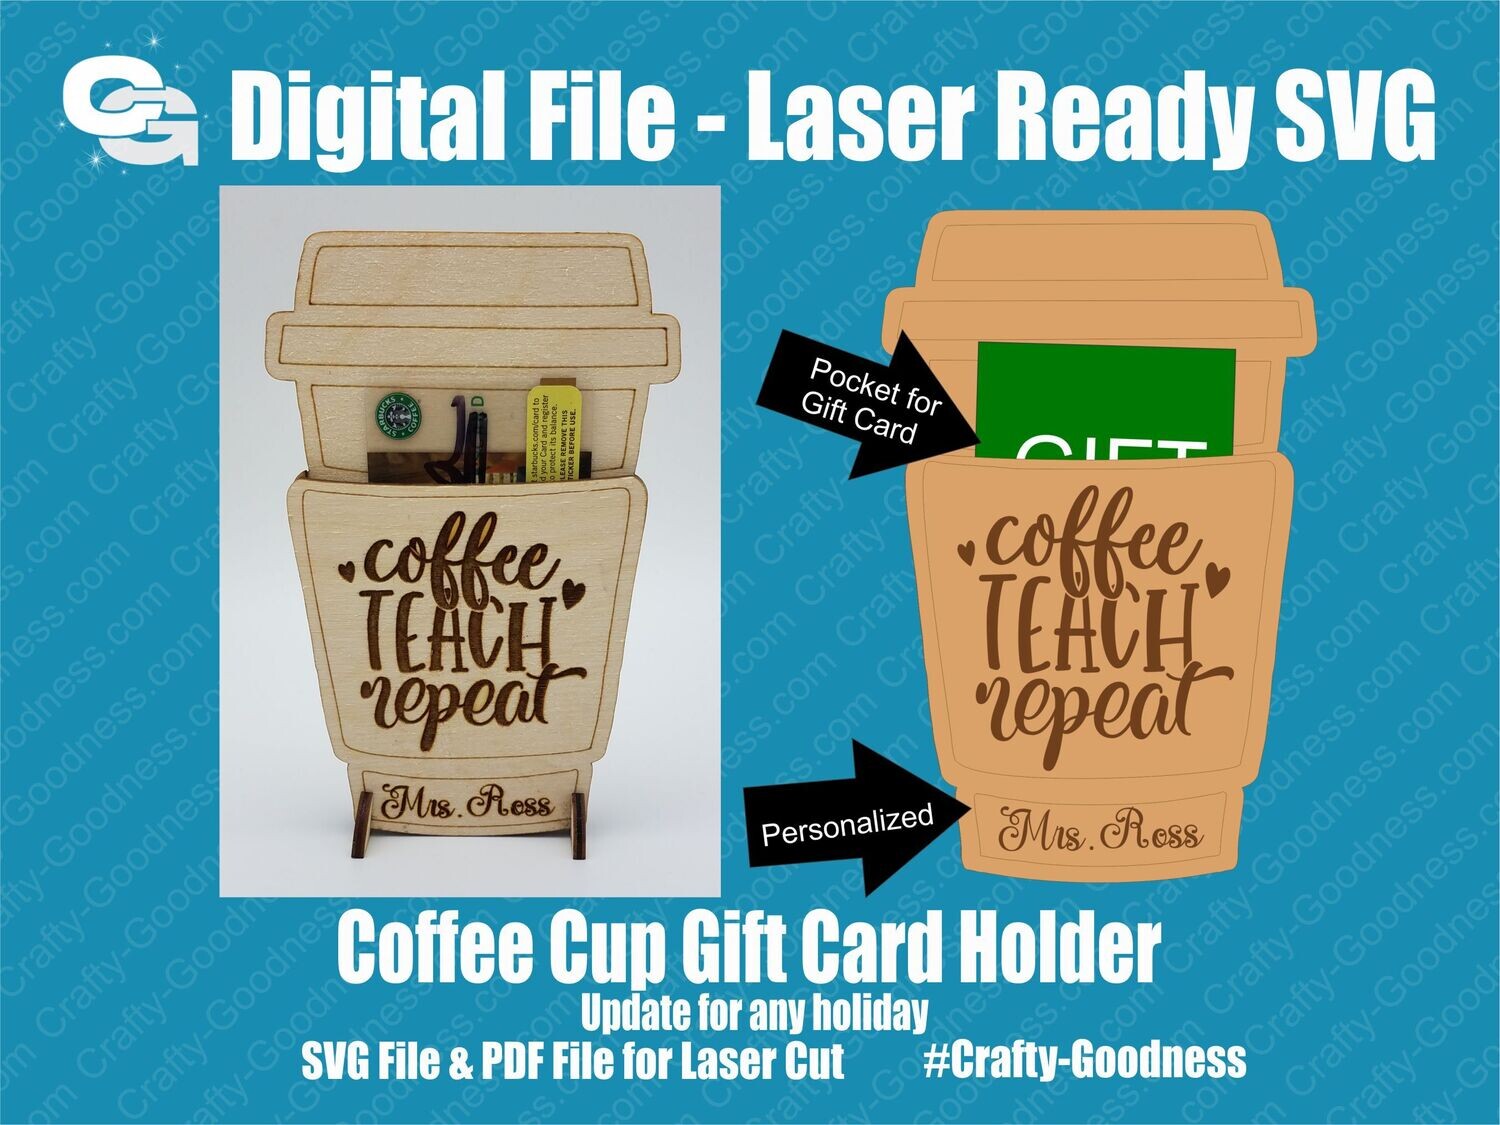 Coffee Cup Gift Card Holder for Teacher Gifts - SVG Glowforge Cut File Digital Download PDF